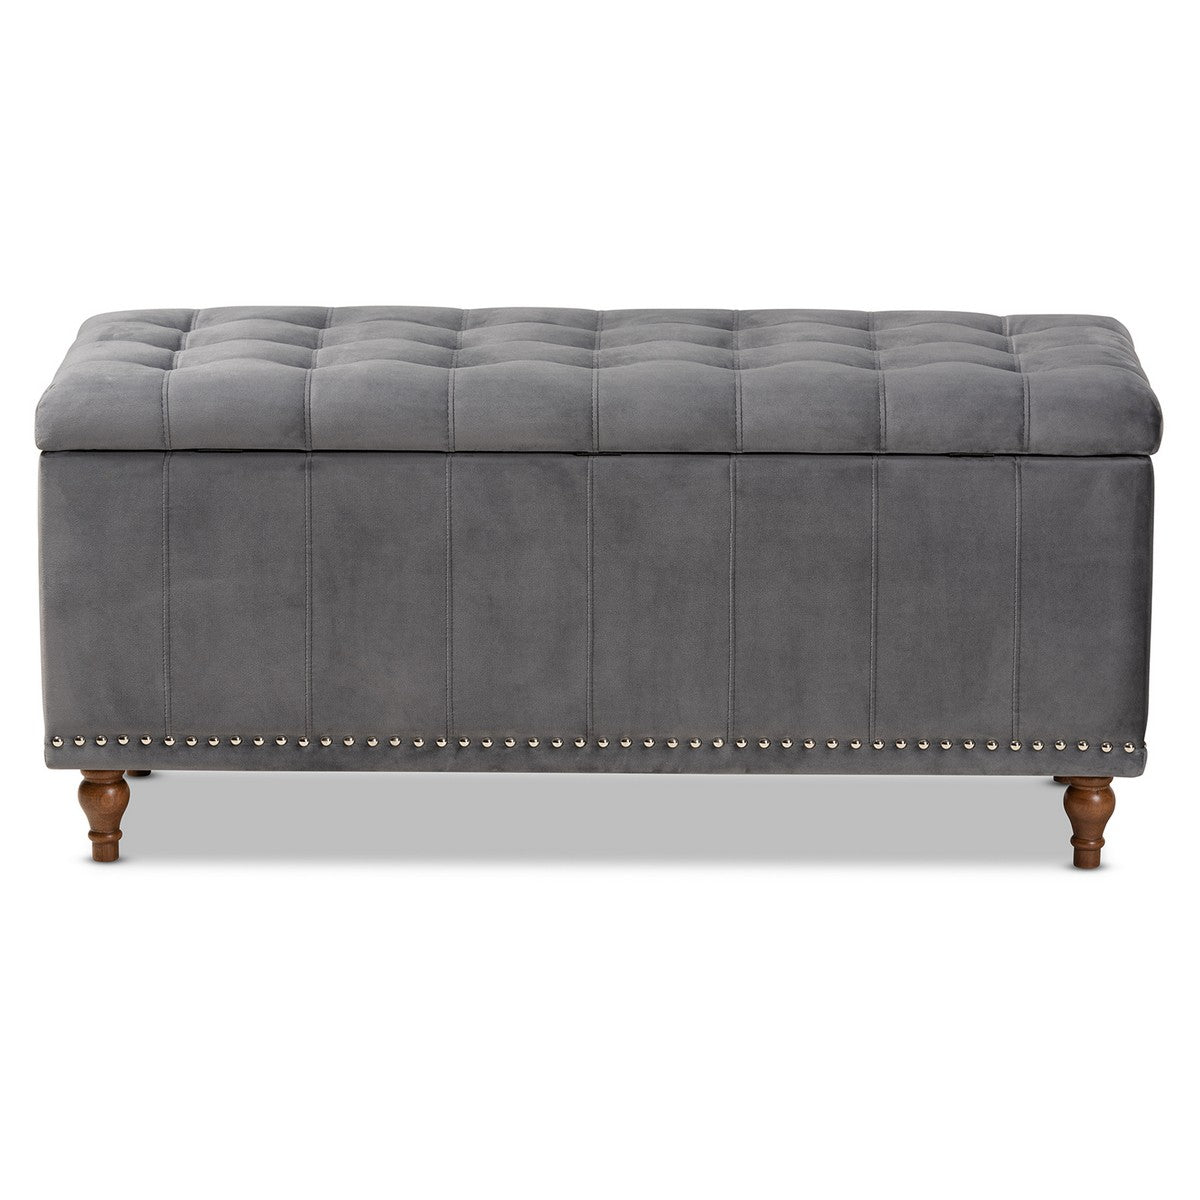 Baxton Studio Kaylee Modern and Contemporary Grey Velvet Fabric Upholstered Button-Tufted Storage Ottoman Bench